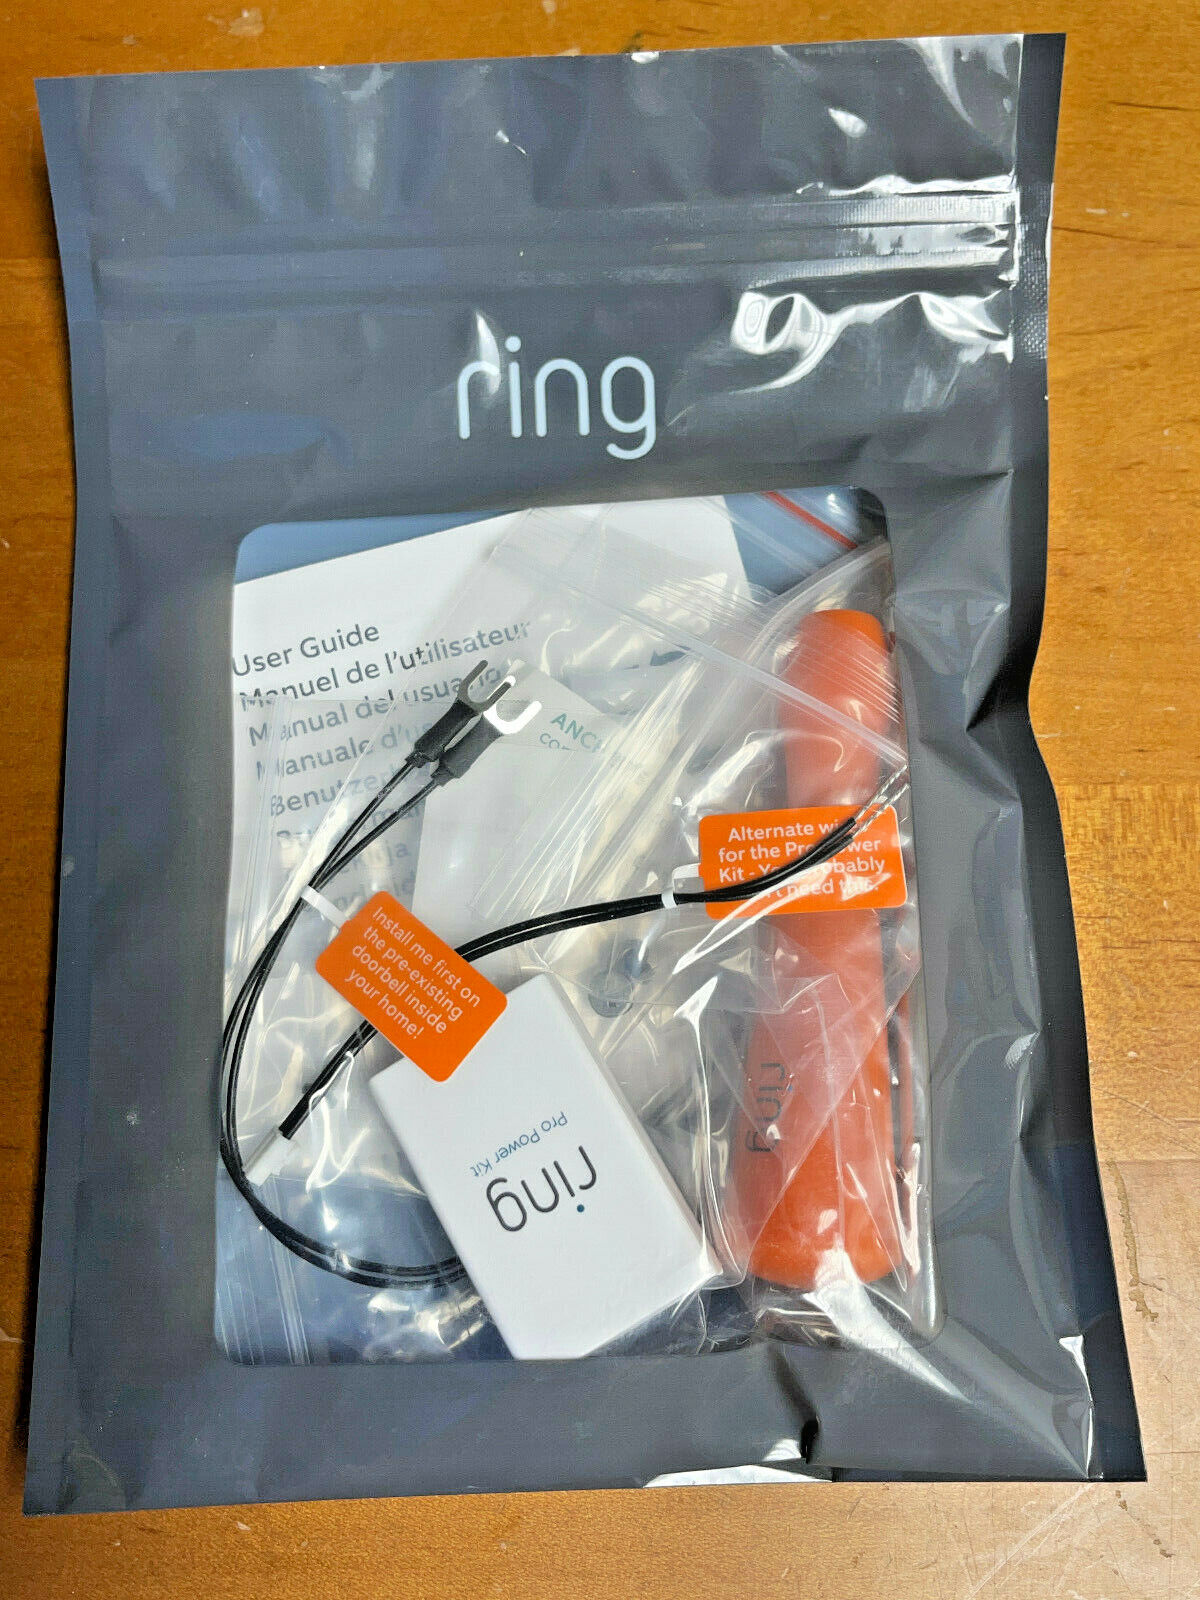 How to Set Up Pre Existing Ring Doorbell